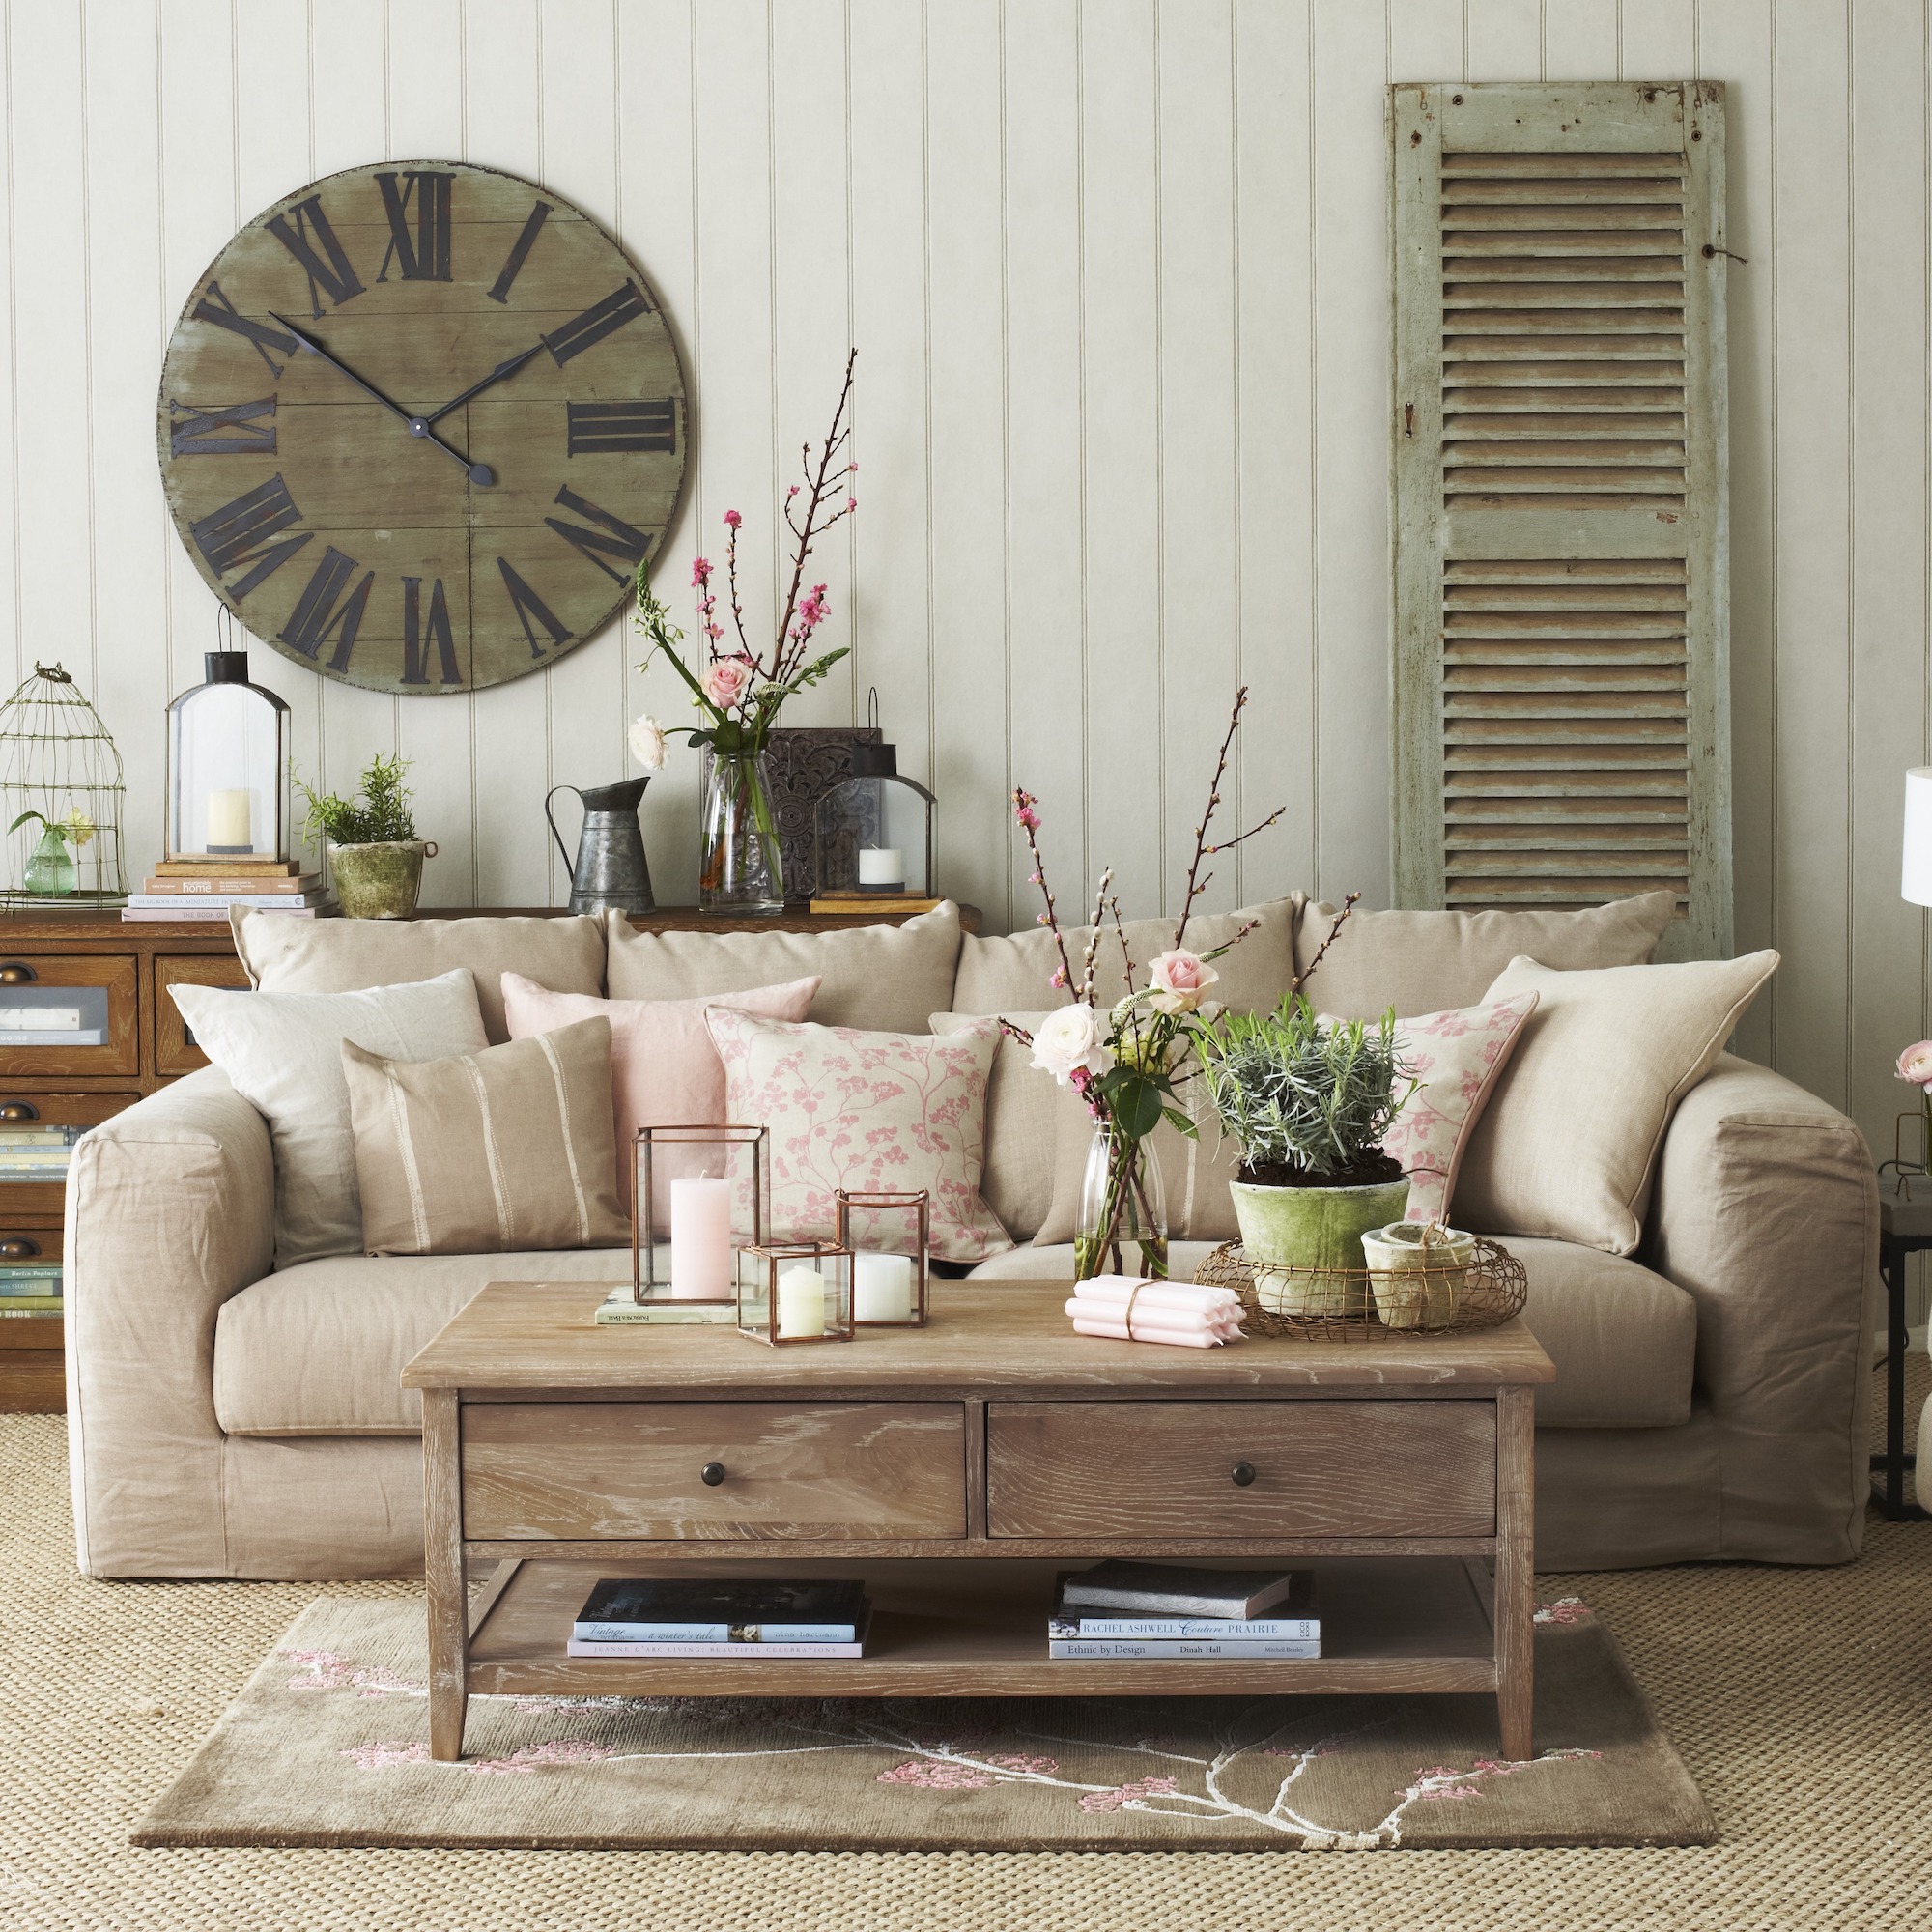 Rustic living room ideas – 10 ways to introduce a warm and cozy feel to your lounge